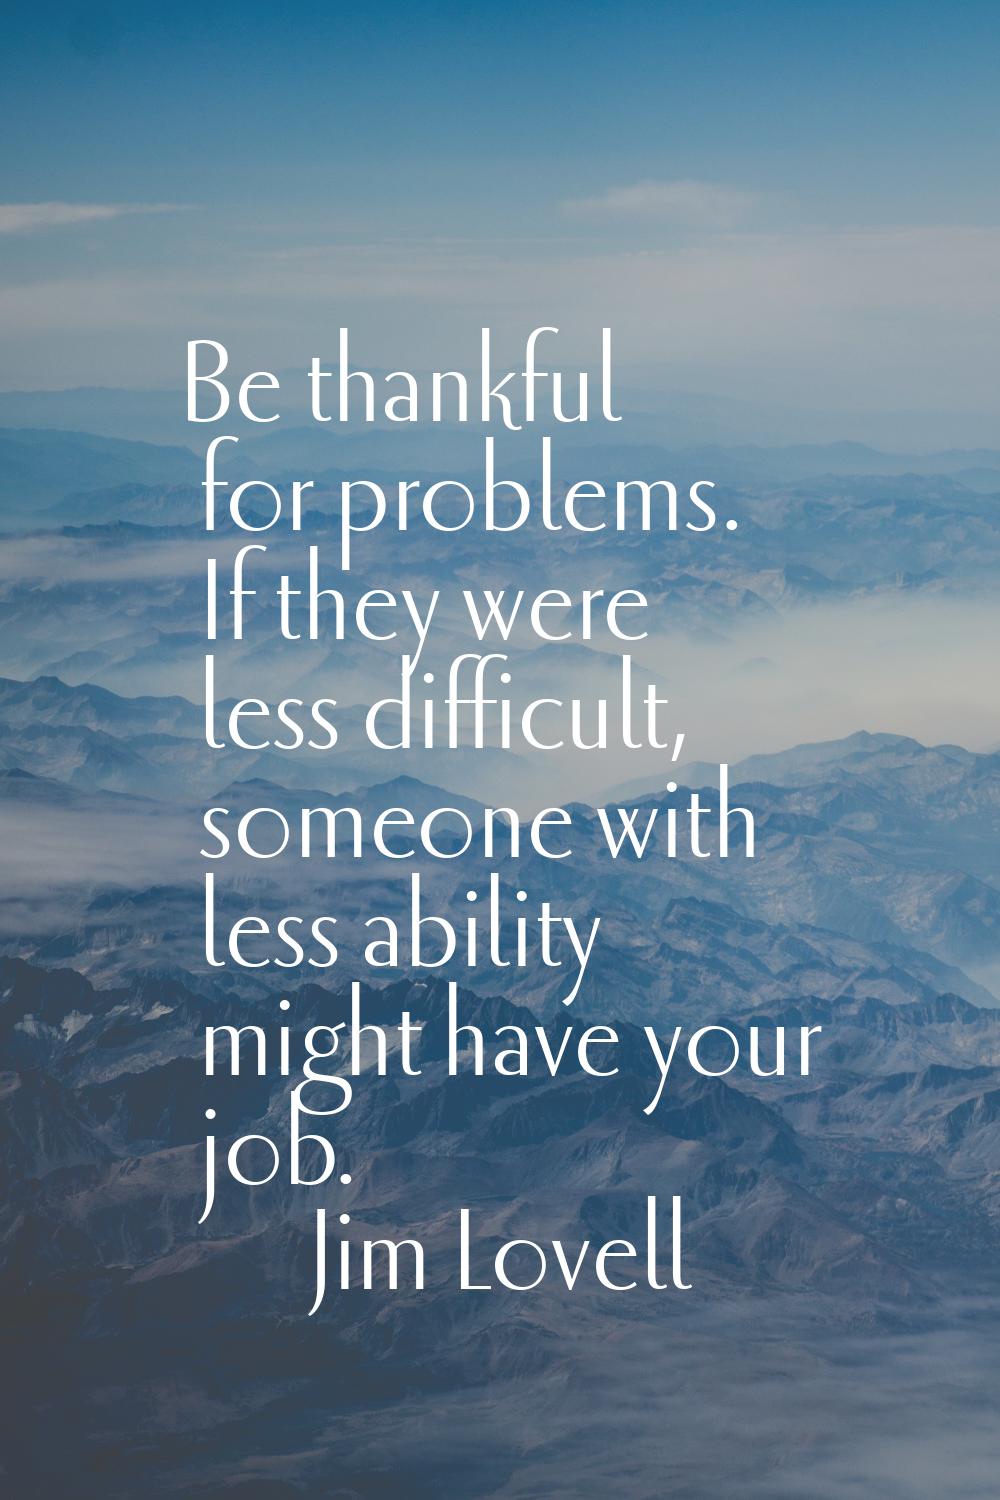 Be thankful for problems. If they were less difficult, someone with less ability might have your jo